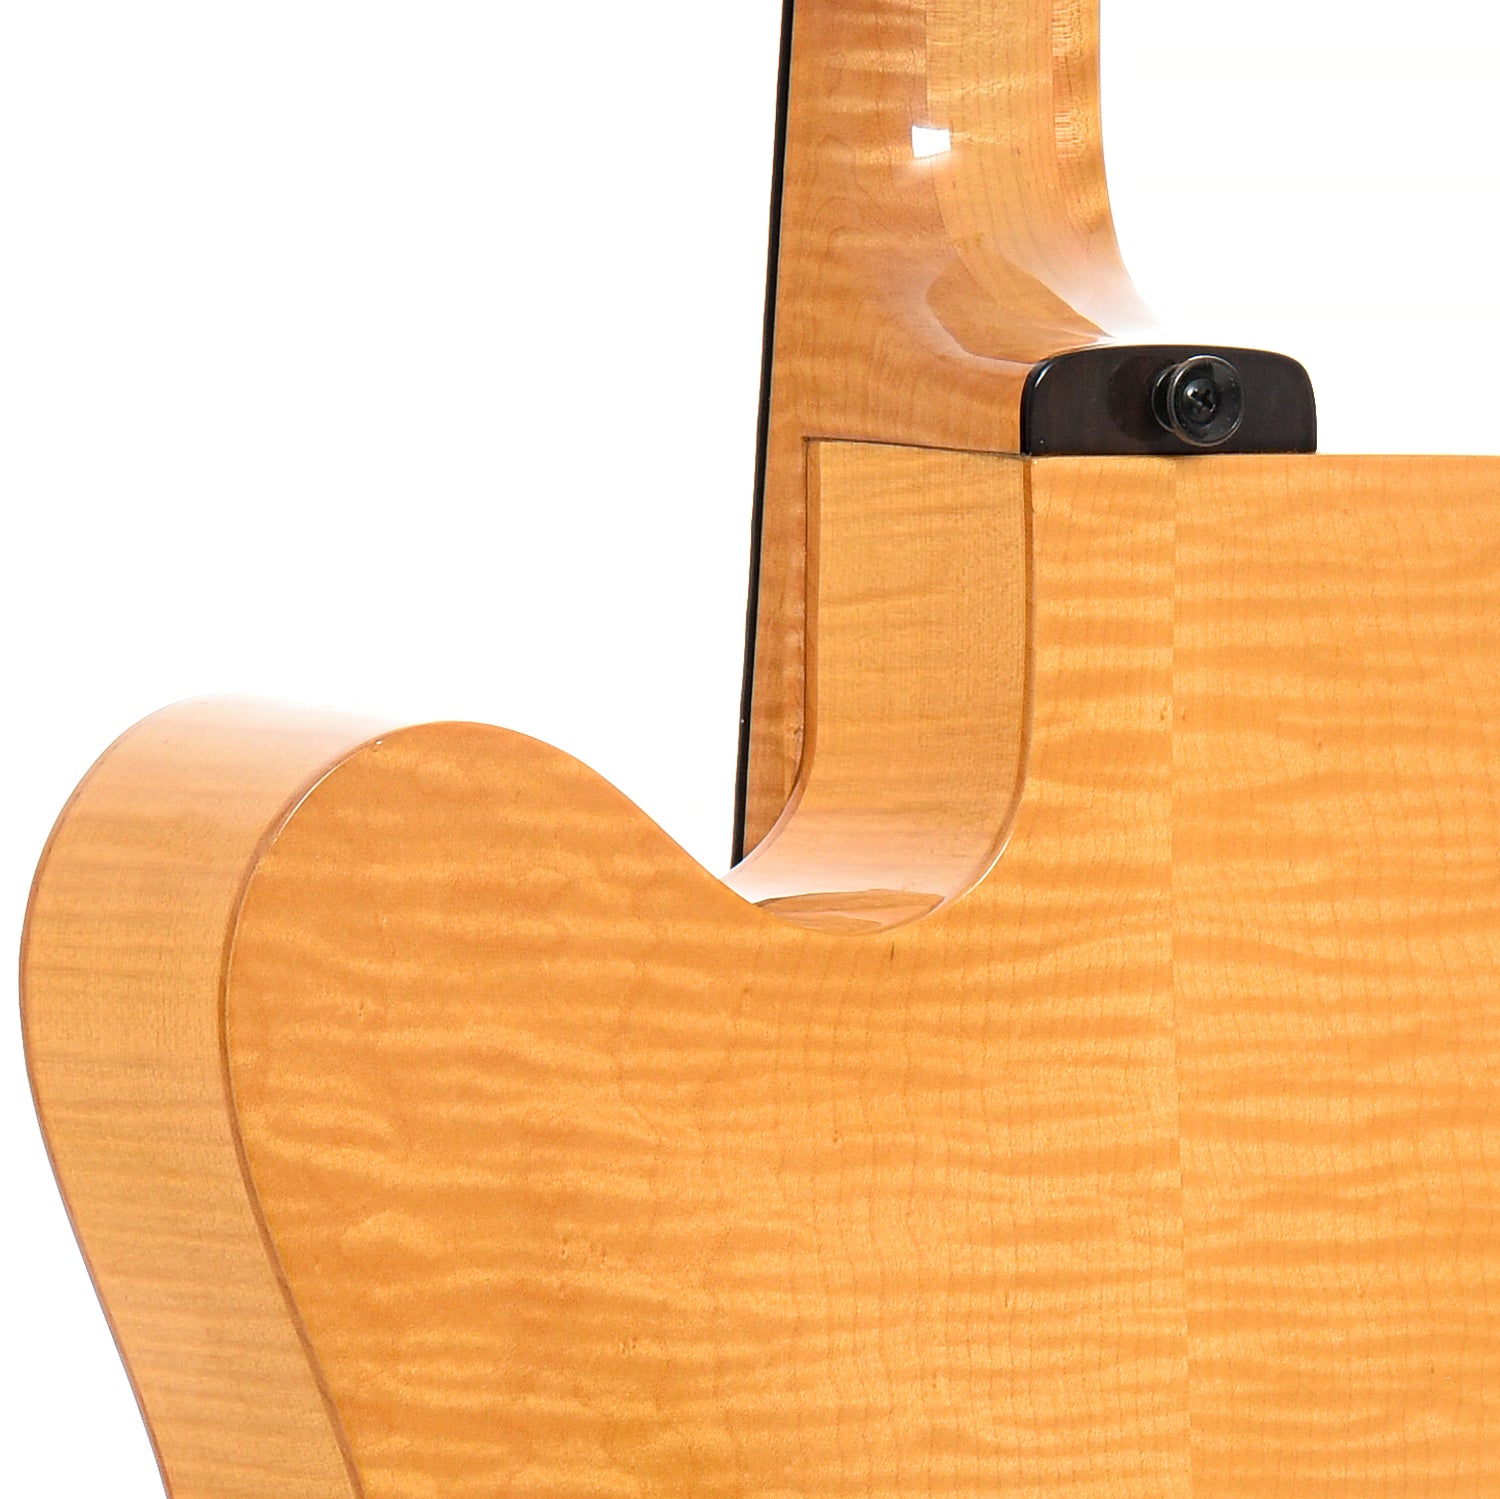 Neck joint of Martin CF-1 Archtop